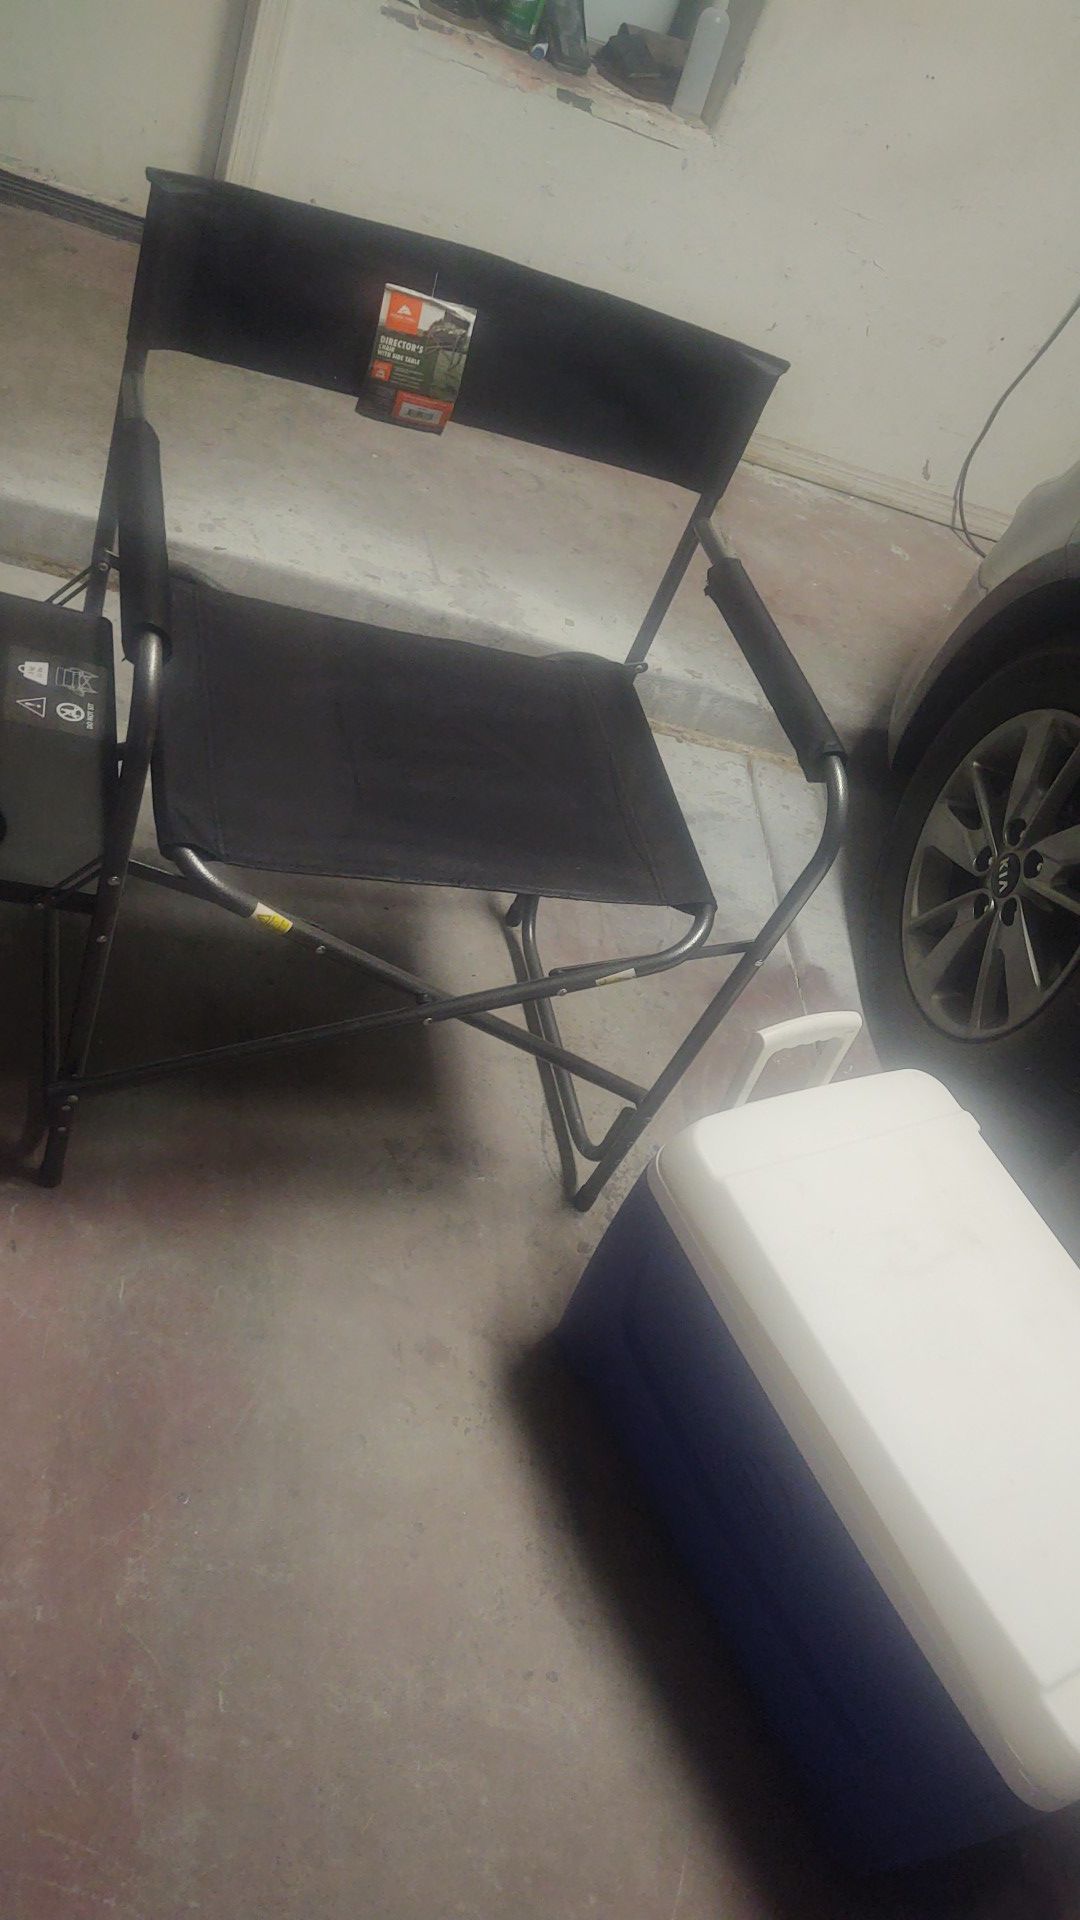 camping chair and cooler